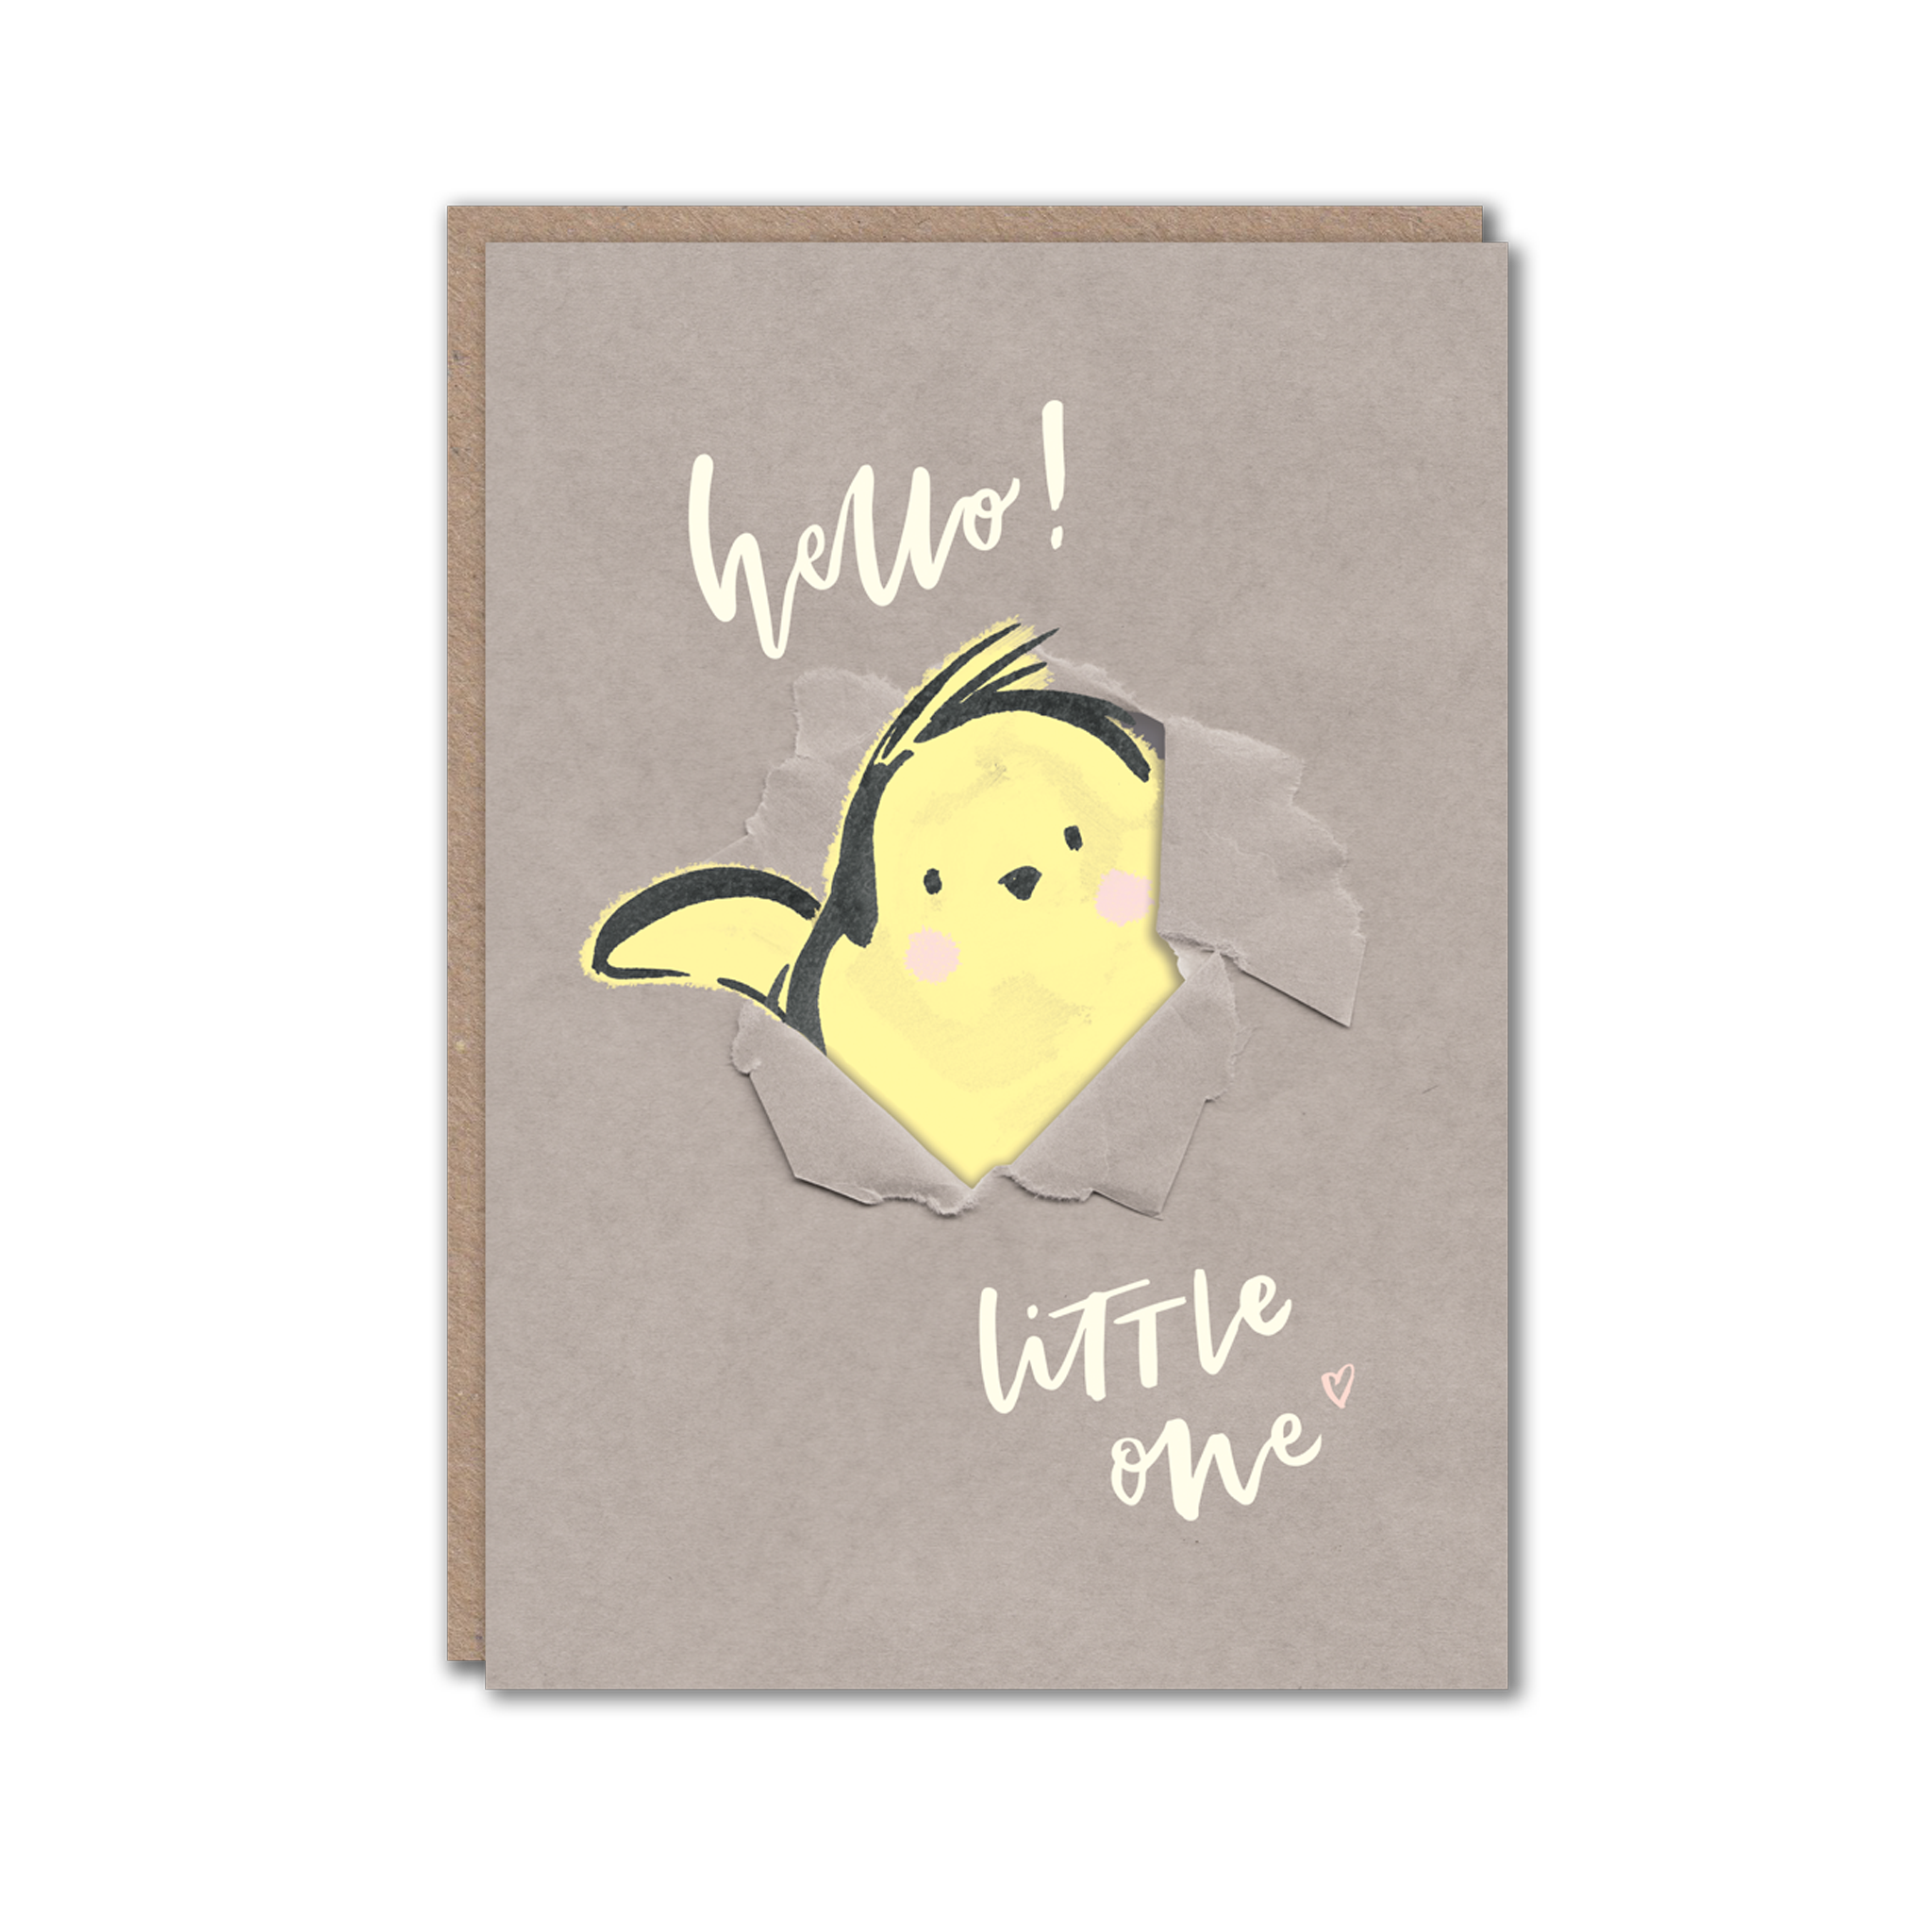 New baby greeting card with cute chick